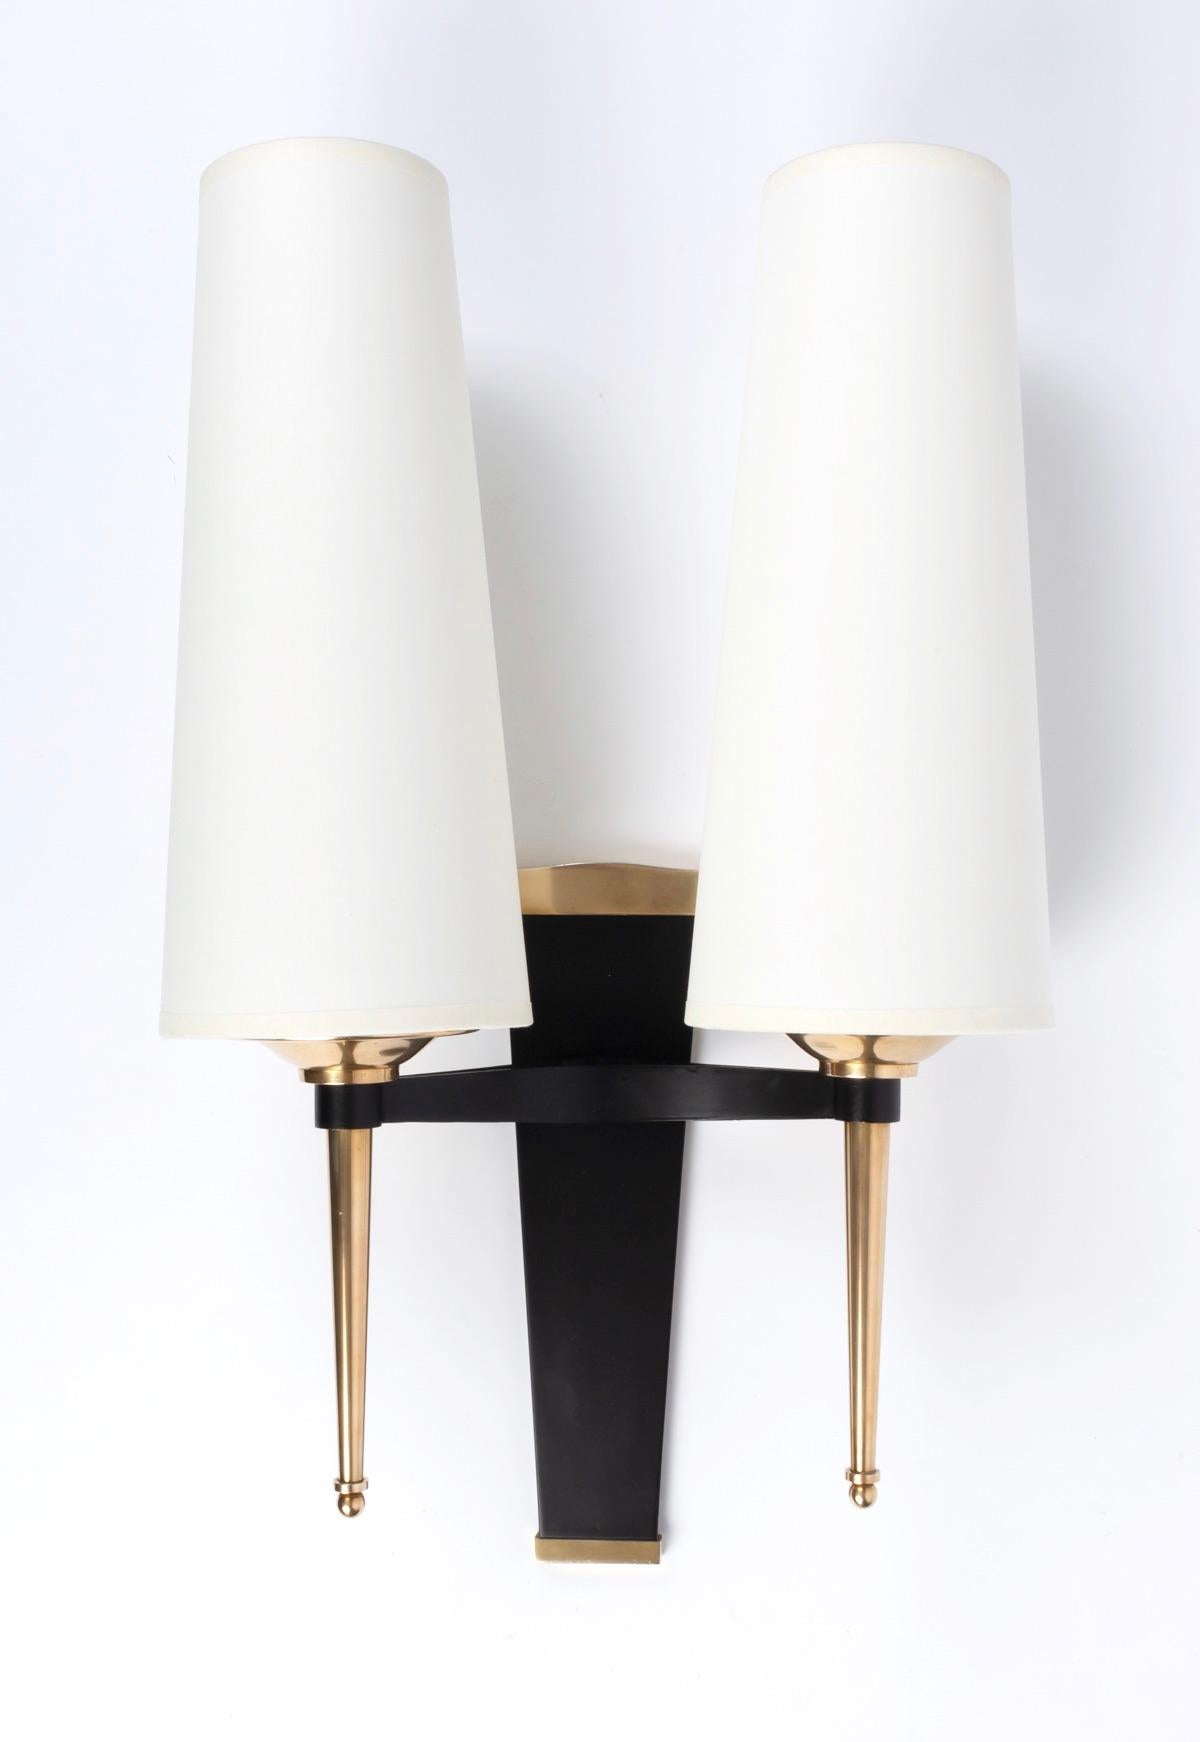 Pair of neoclassical bronze wall lights Jules Leleu, 1940
Composed of a trapezoidal base in blackened bronze highlighted by a gilded bronze band on the upper and lower part of the wall lamp.
Two bright arms in the shape of a point decorated on the